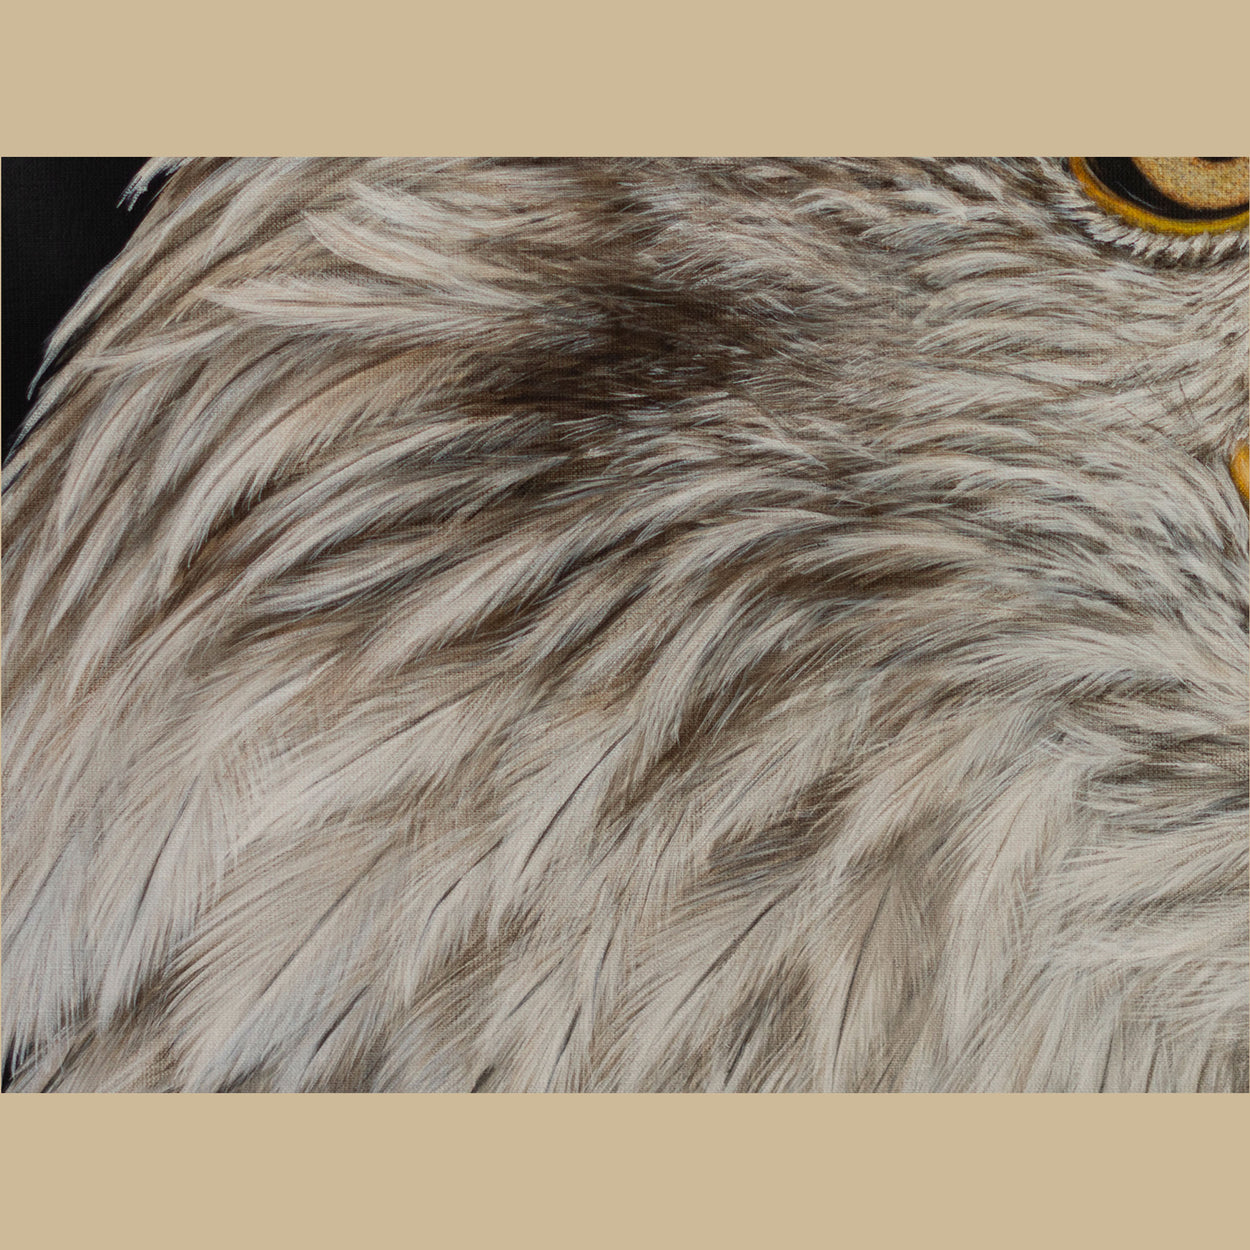 Close-up of a painting of a bald eagle face feathers